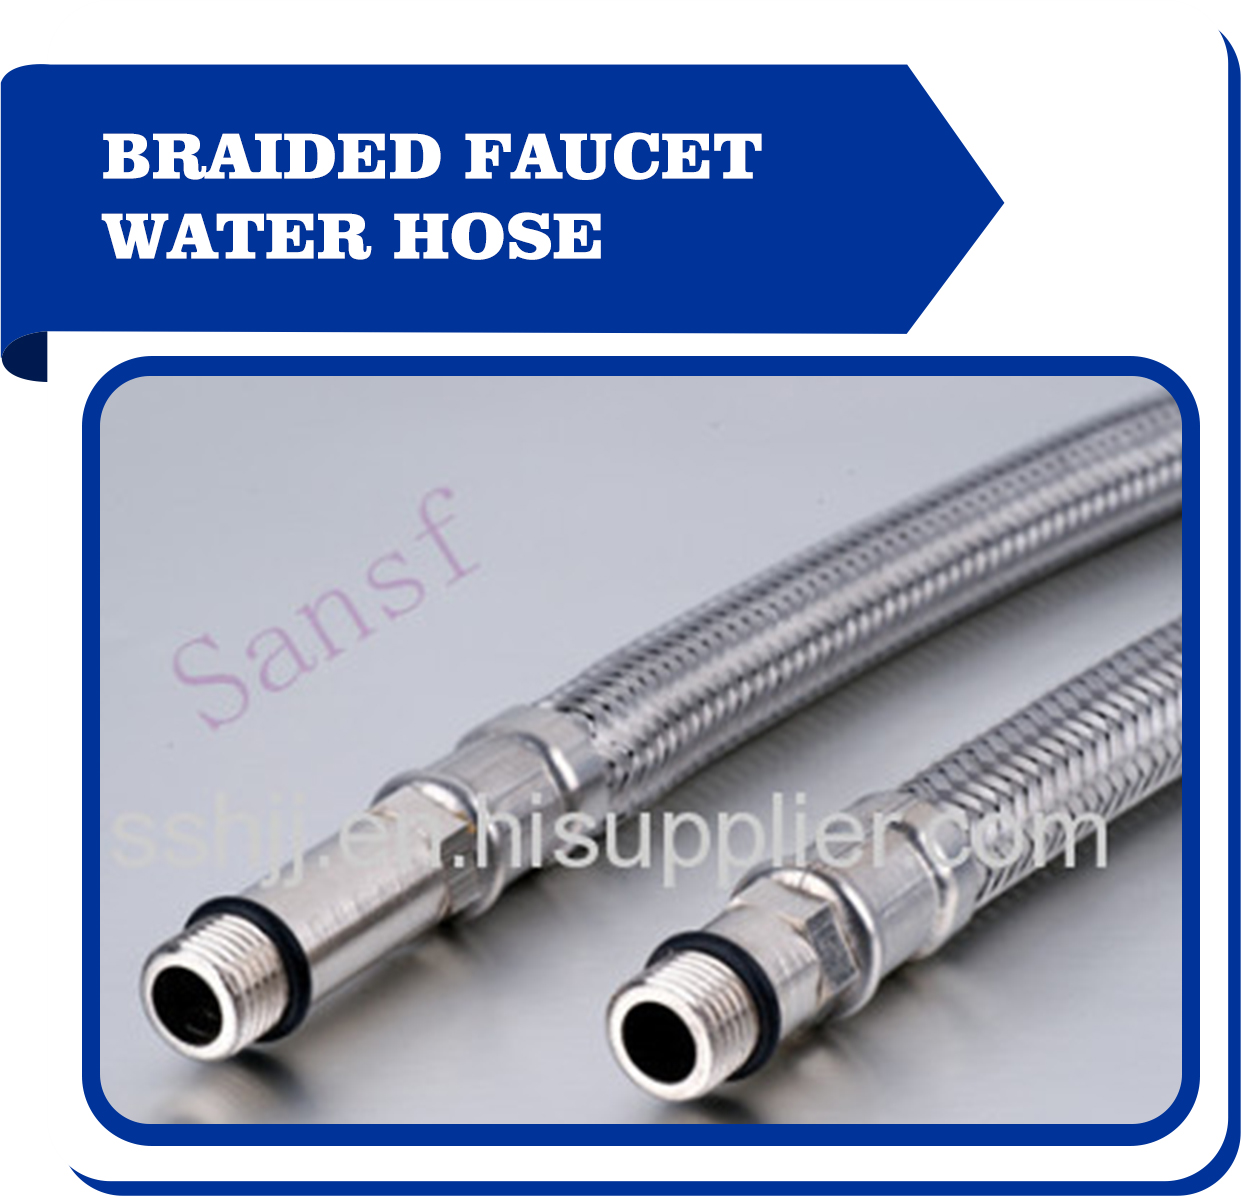 Braided faucet water hose